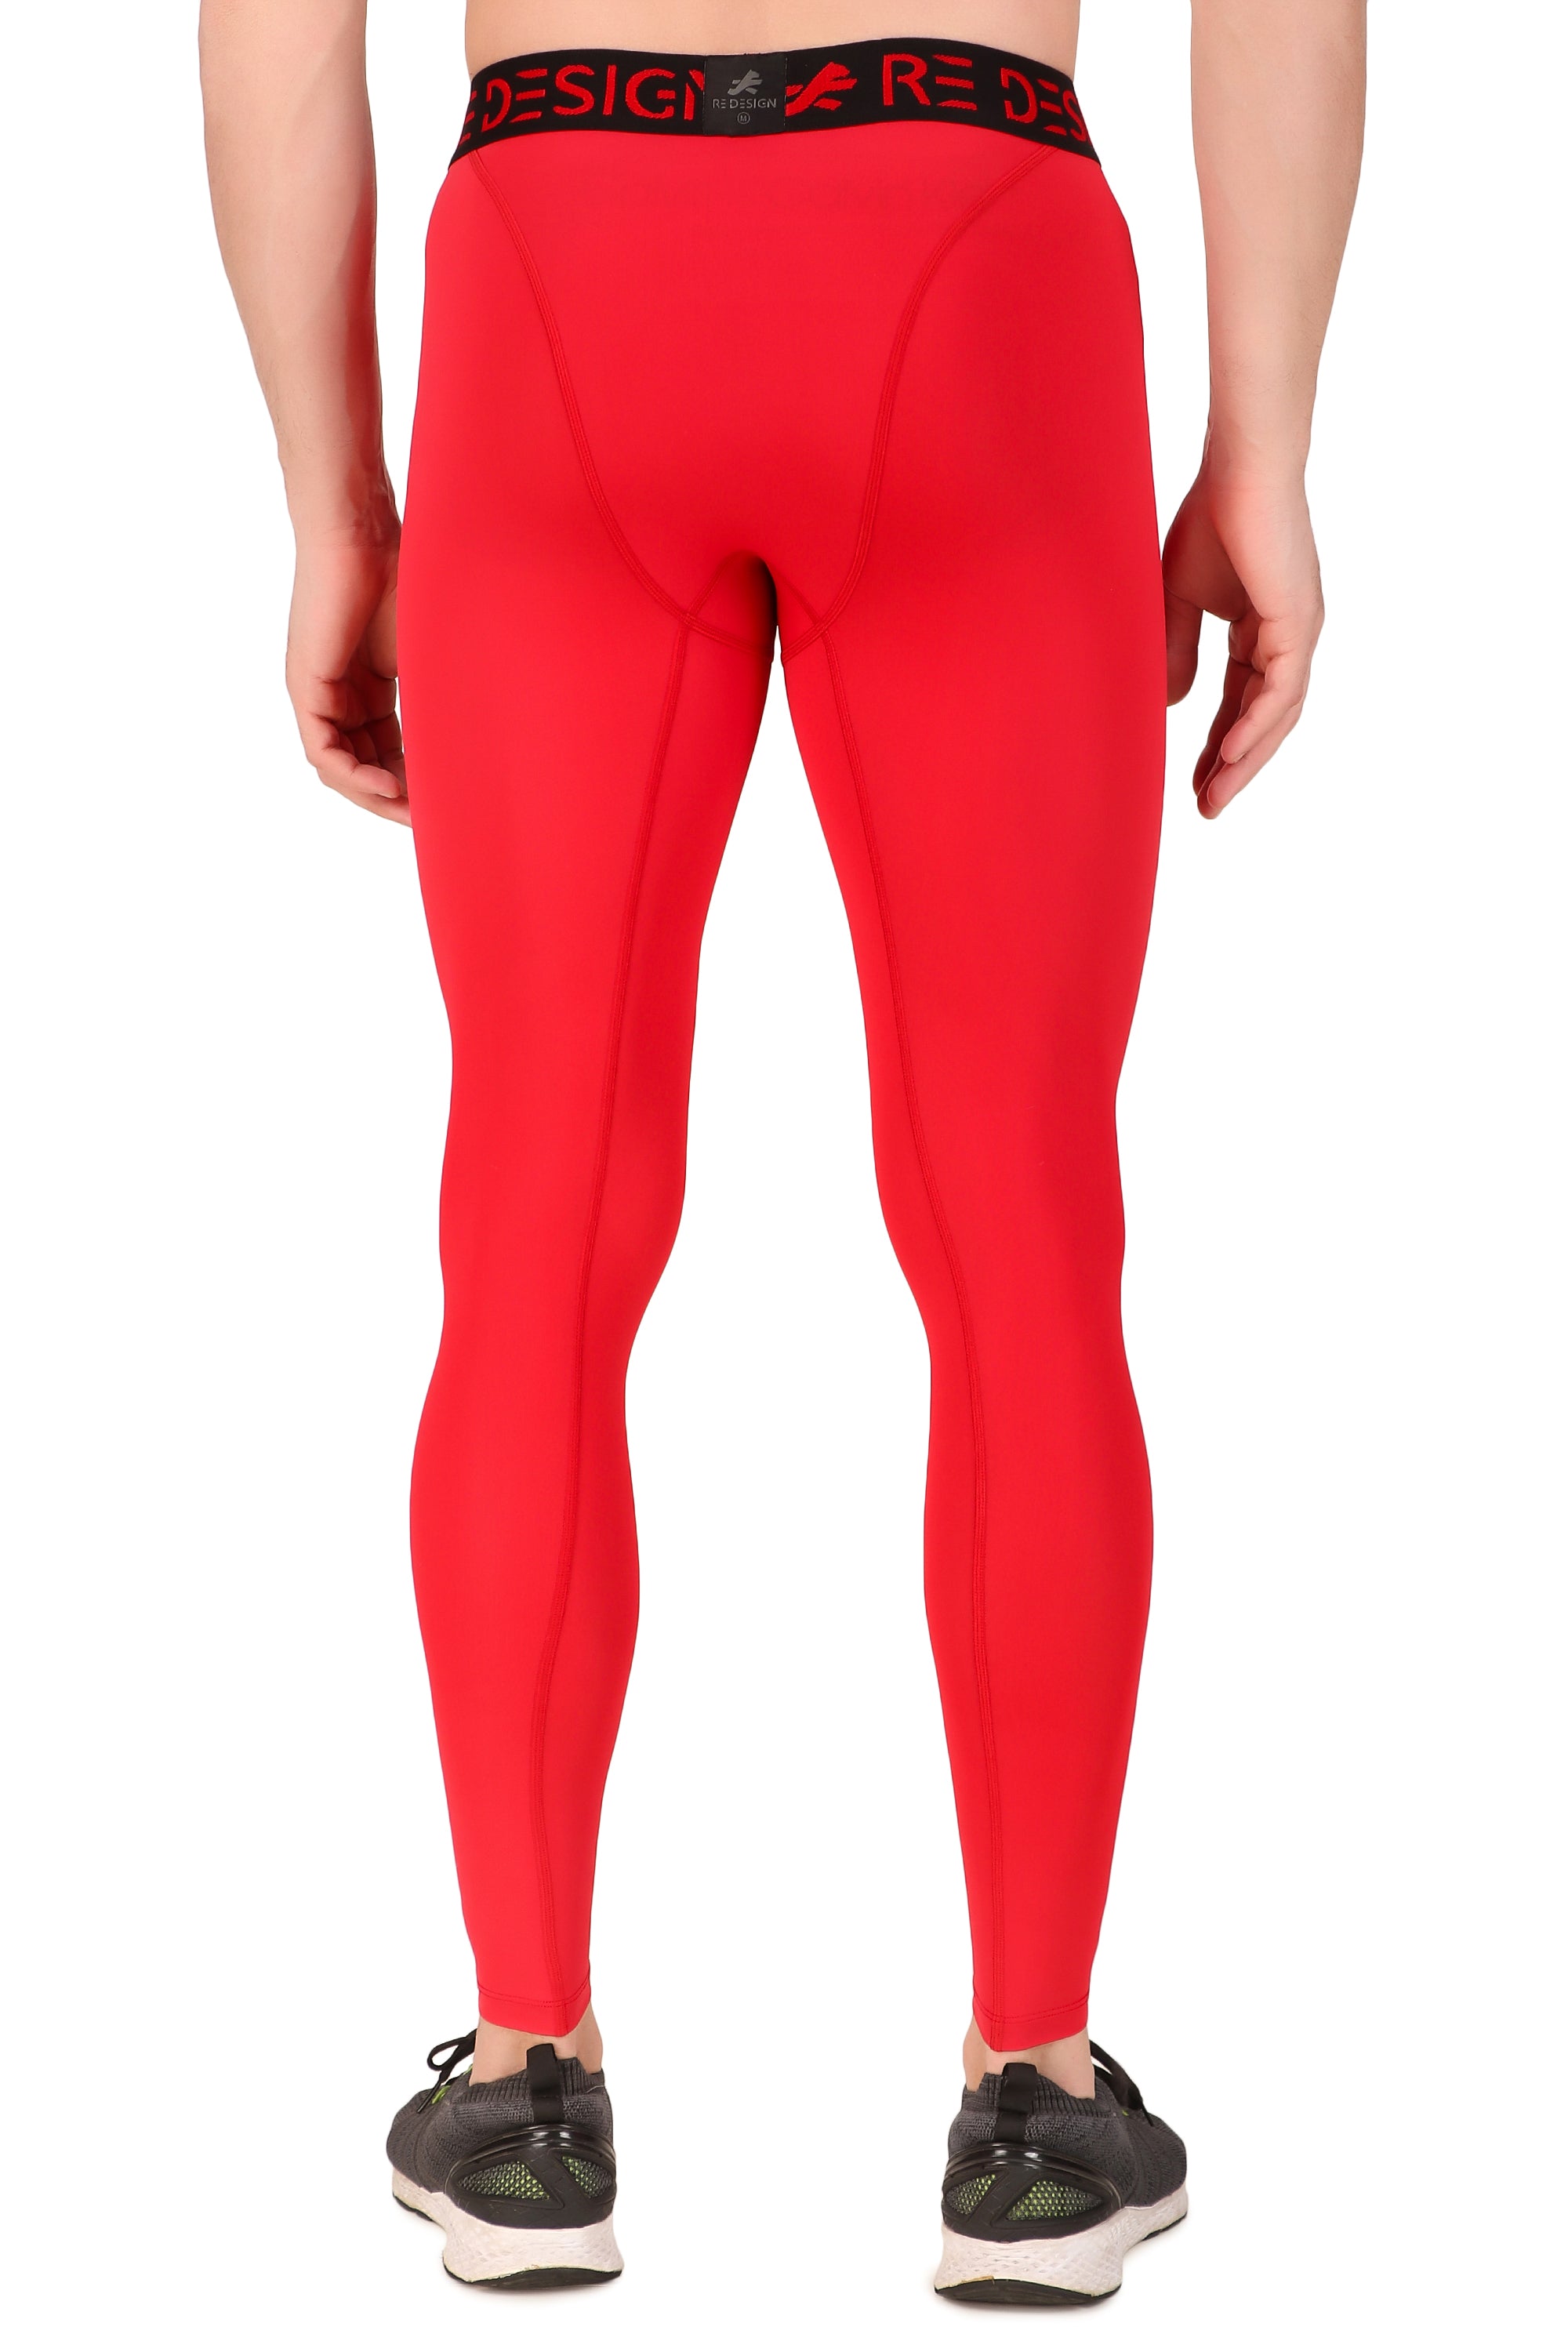 Nylon Compression Pant and Full Tights For Men (Red) – ReDesign Sports